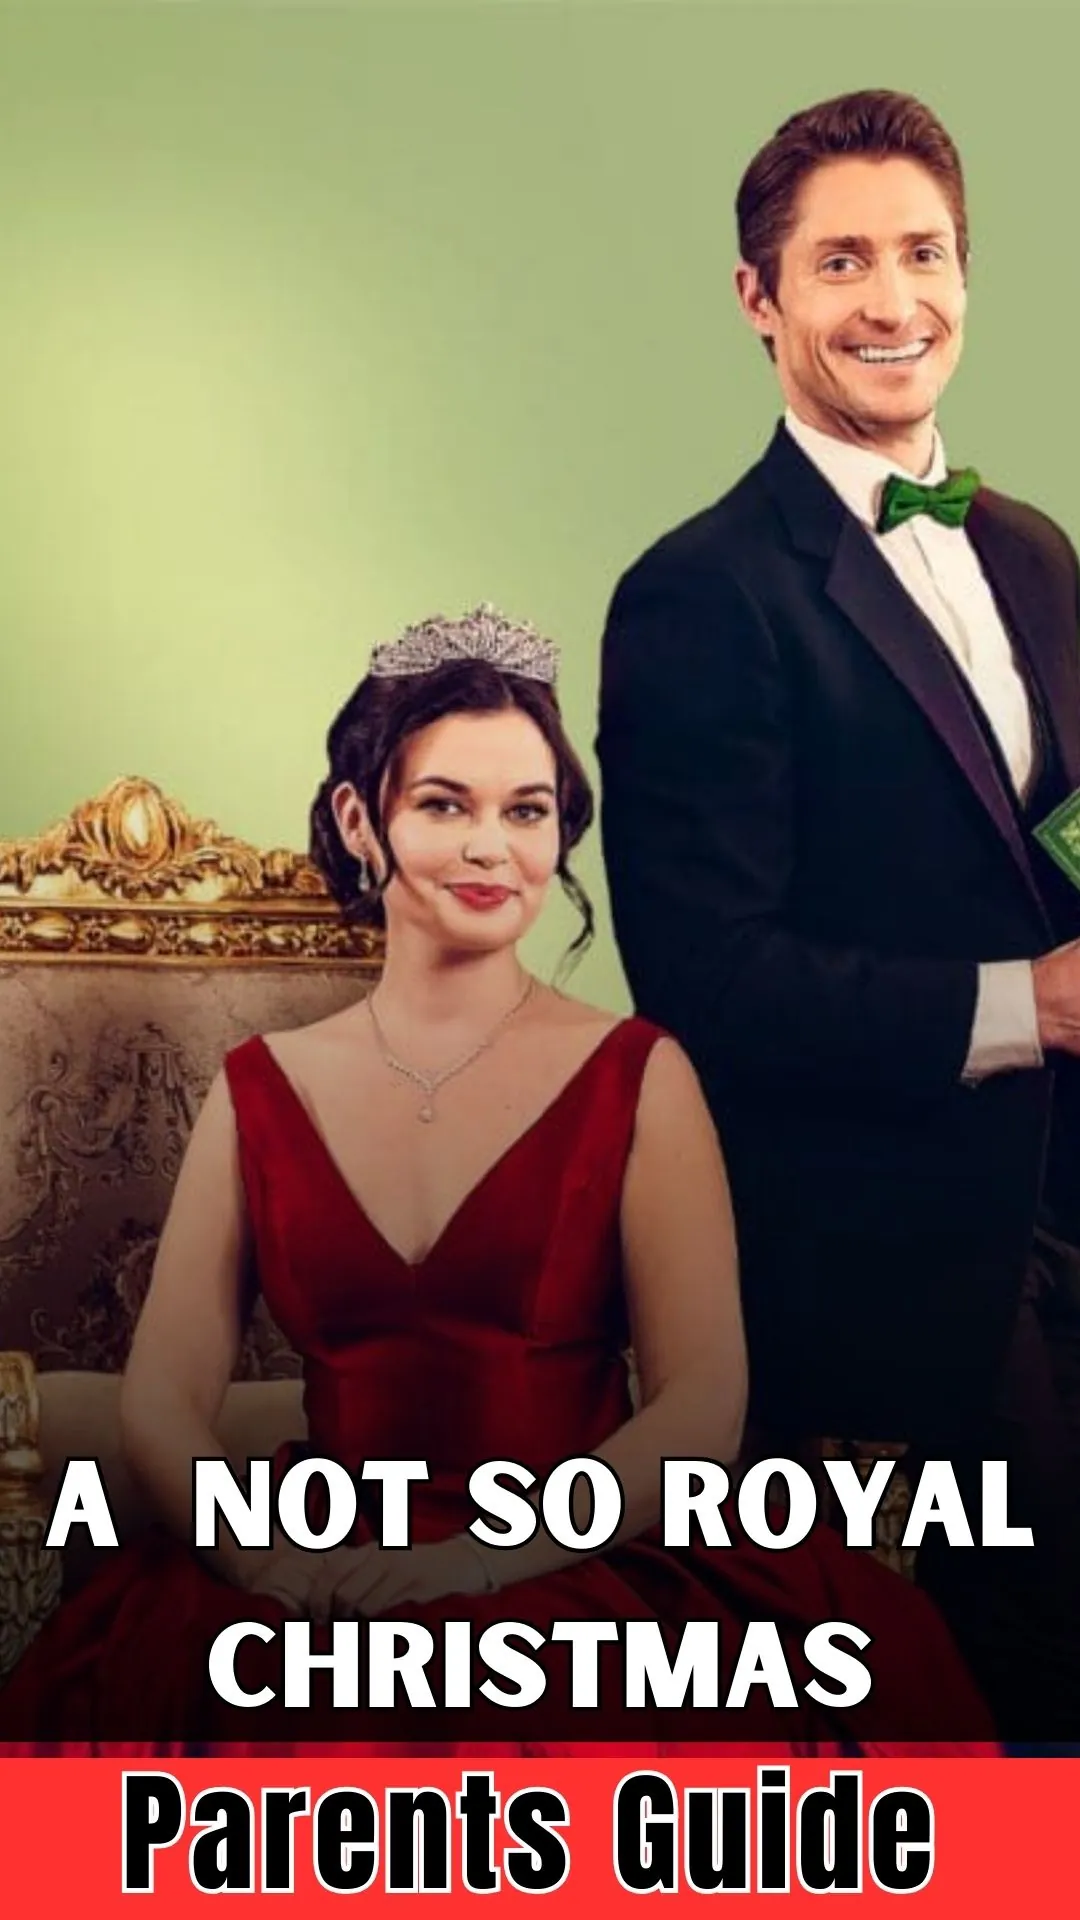 A Not So Royal Christmas Parents Guide (2)